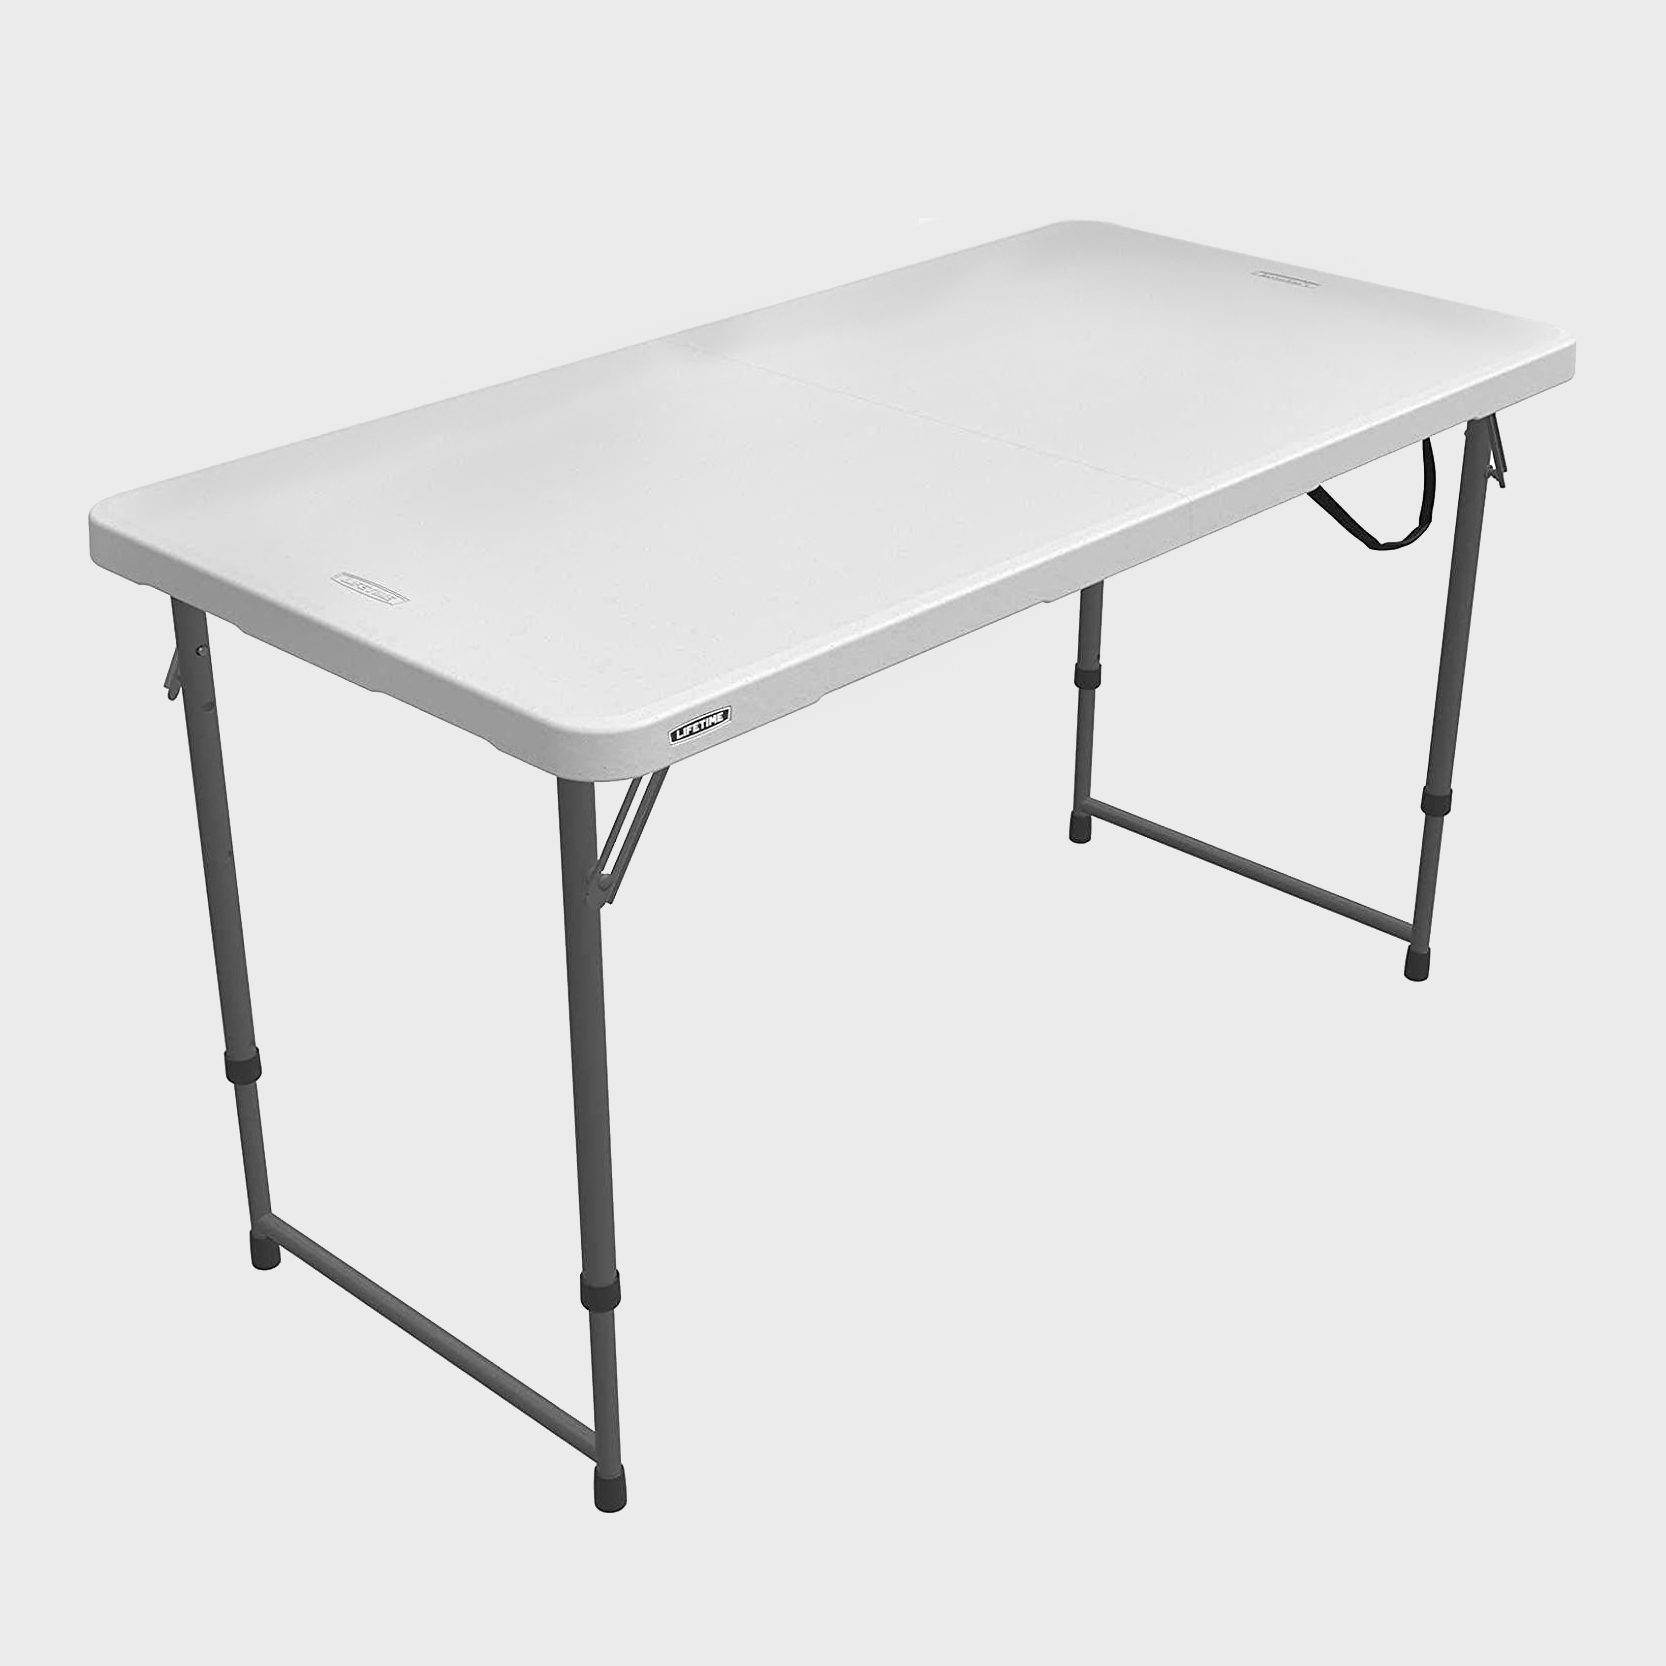 The Best Folding Tables To Accommodate Holiday Guests